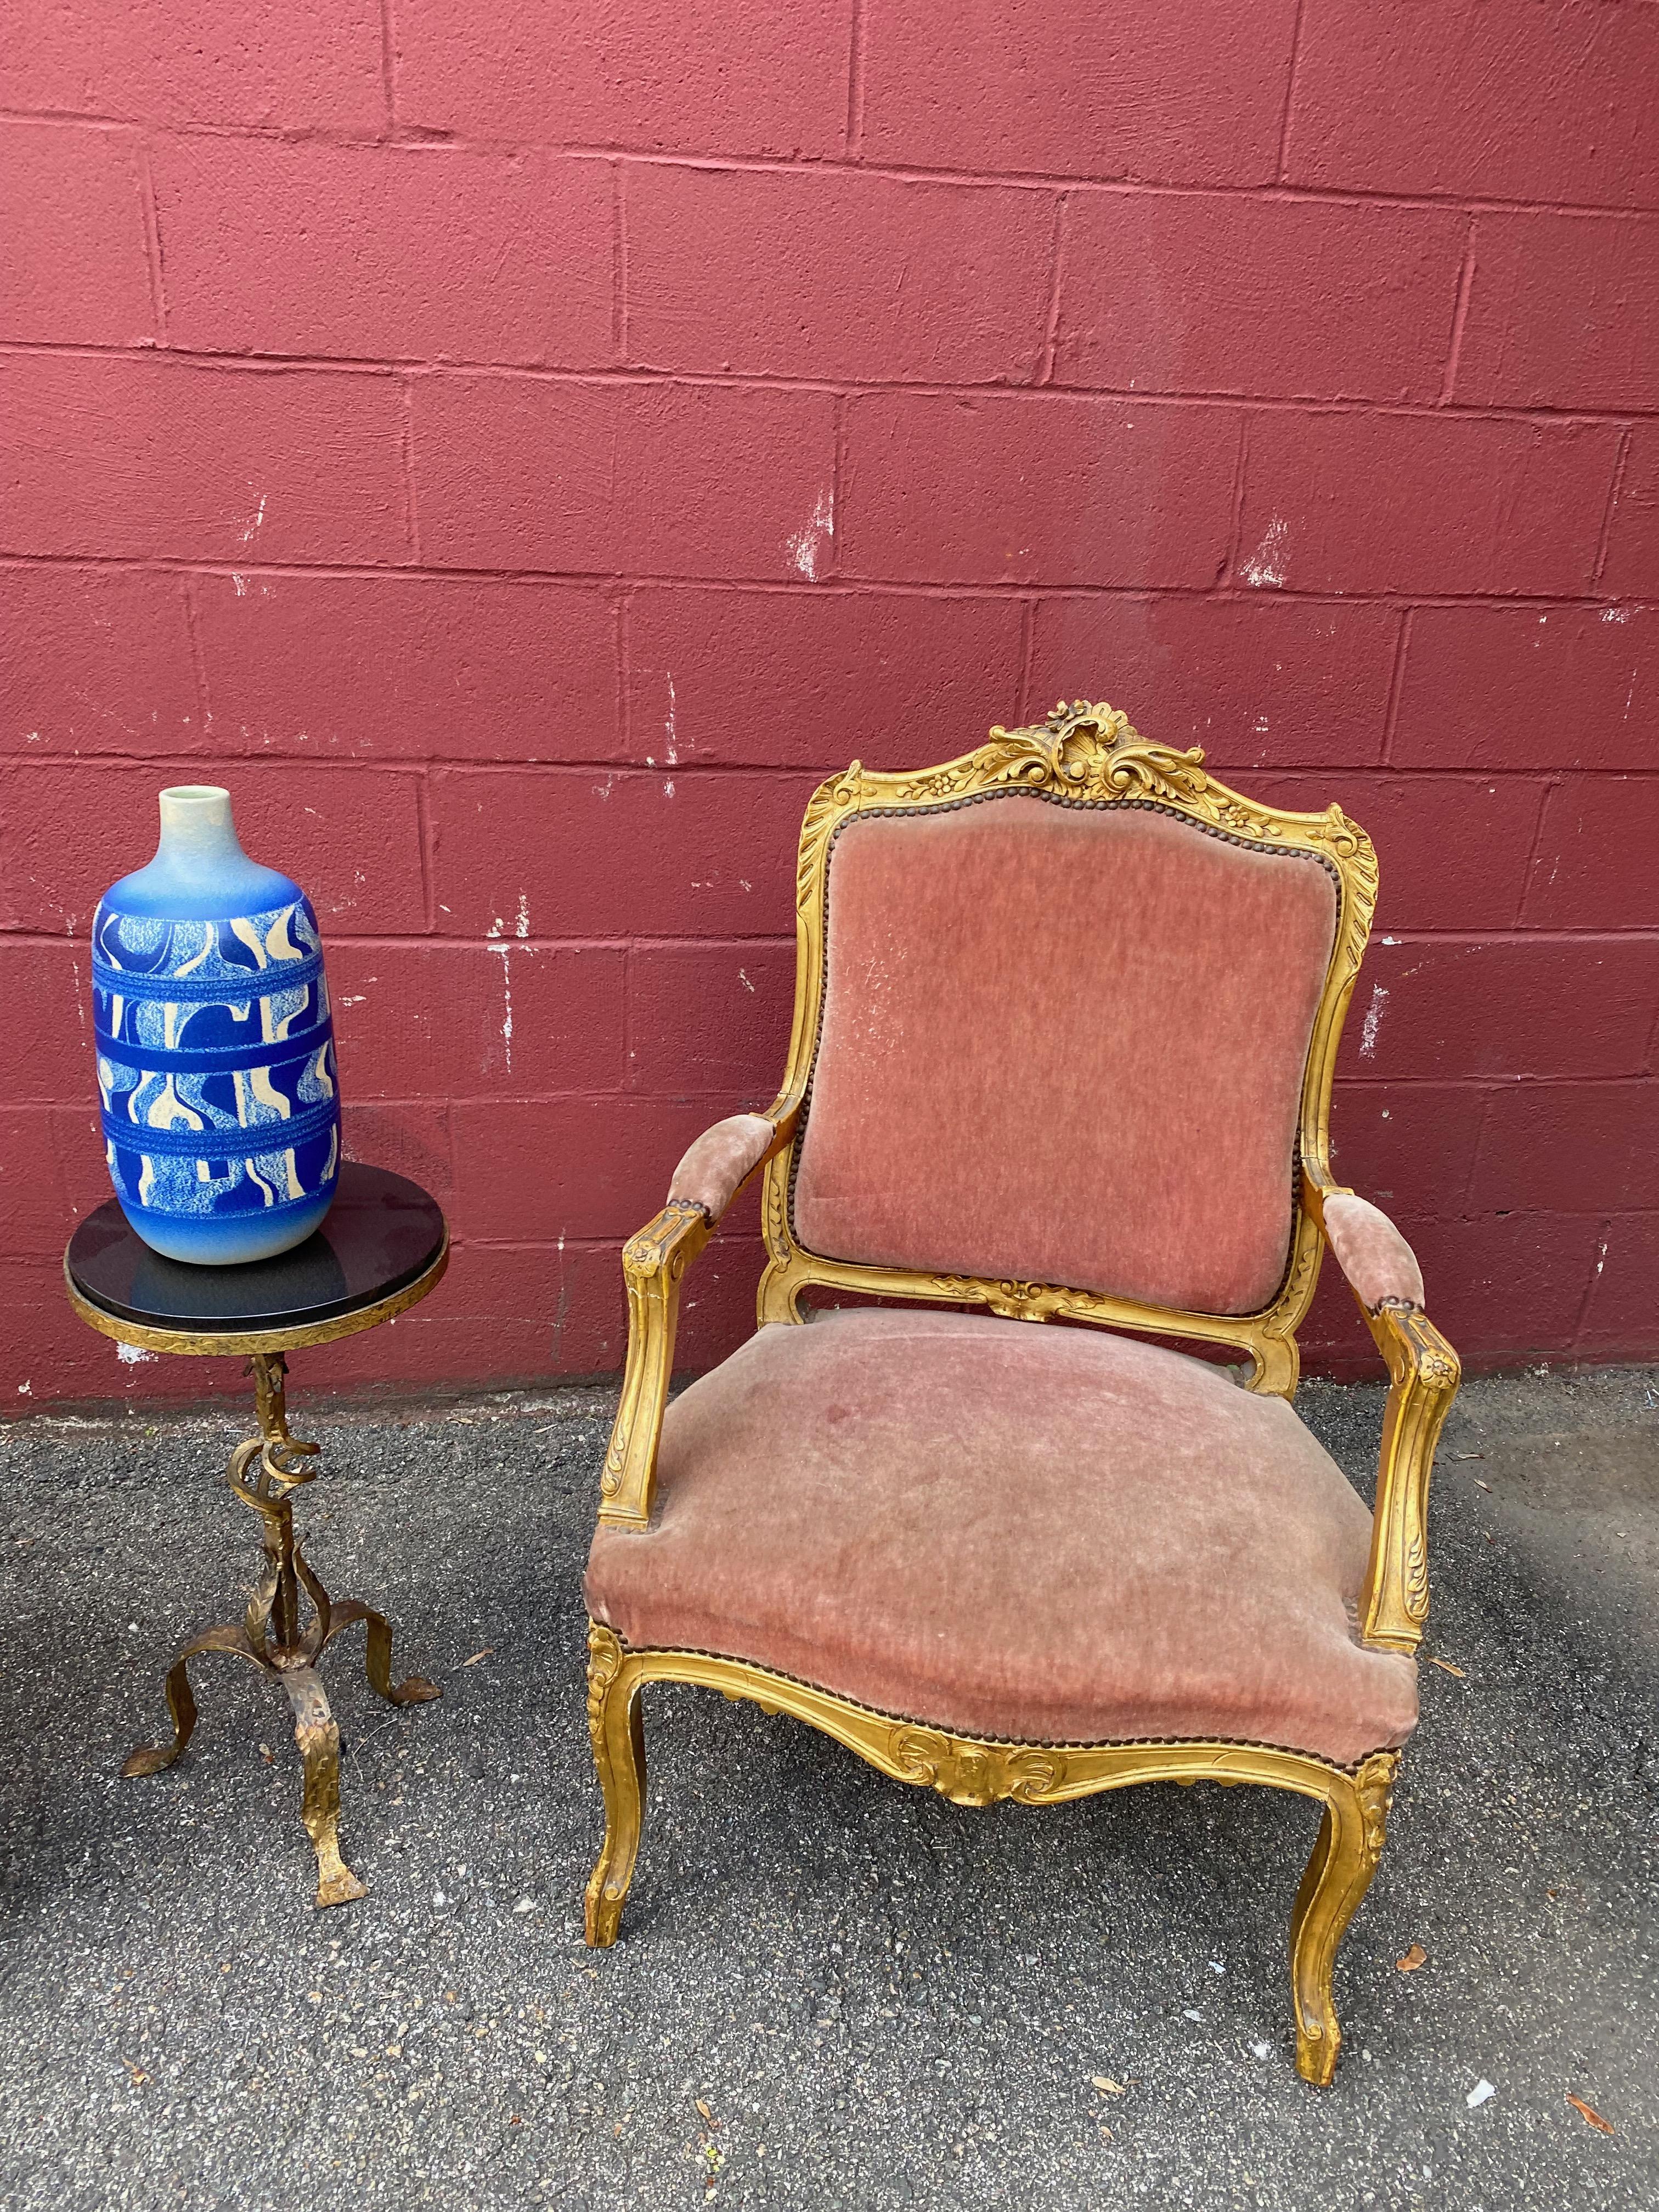 Pair of French Louis XV Style Gilt Armchairs in Faded Salmon Velvet 13